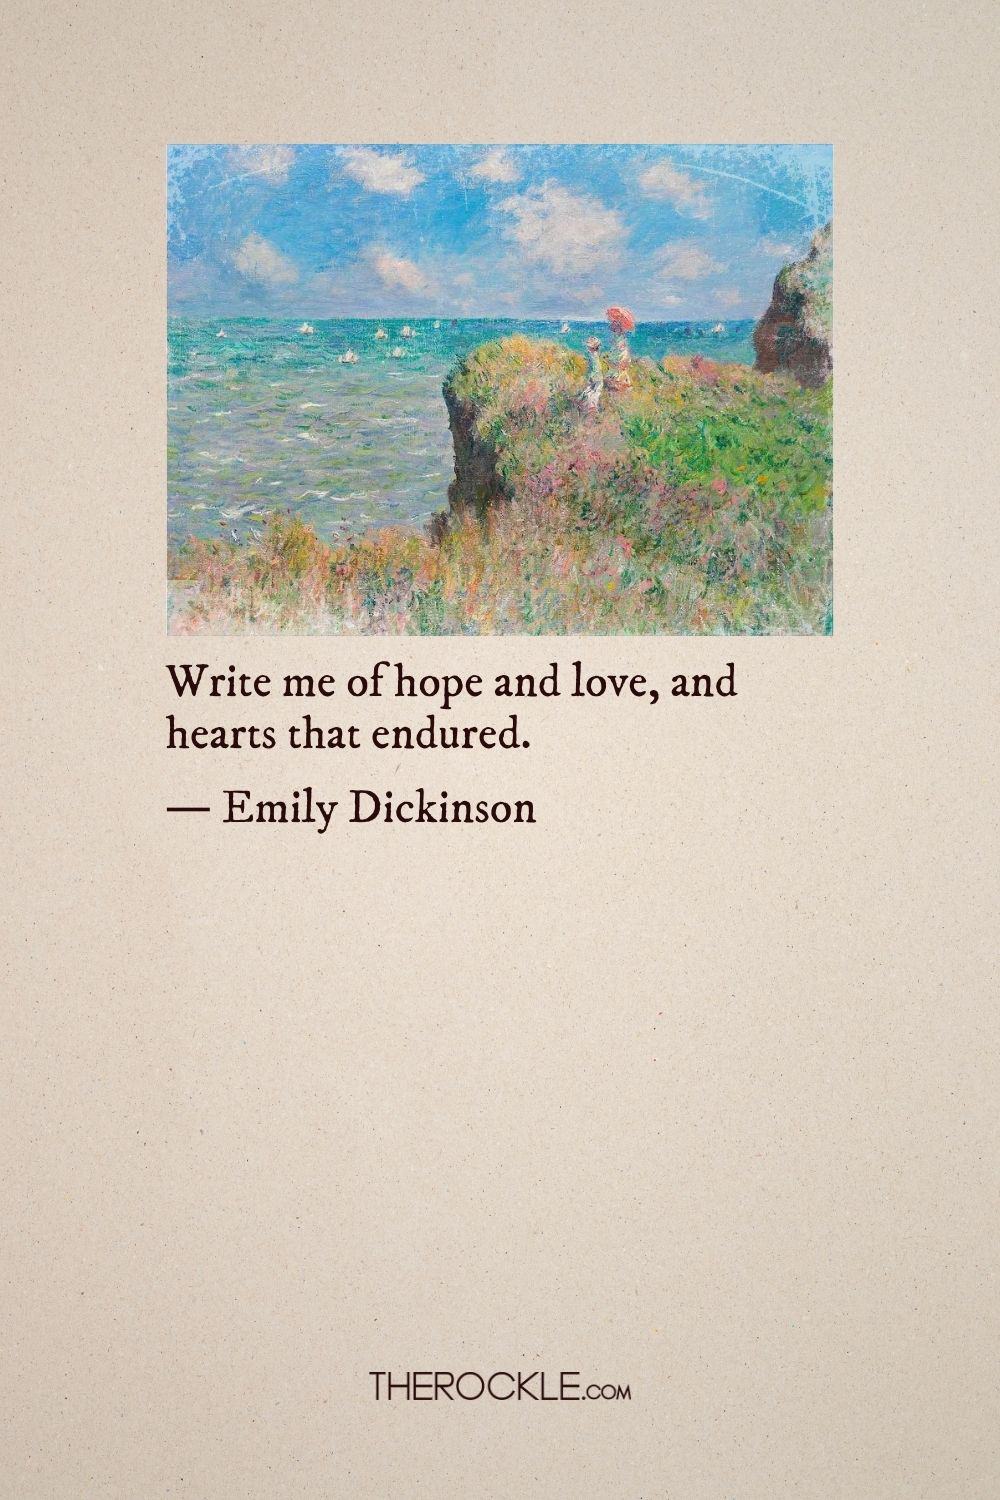 Emily Dickinson on resilient hearts